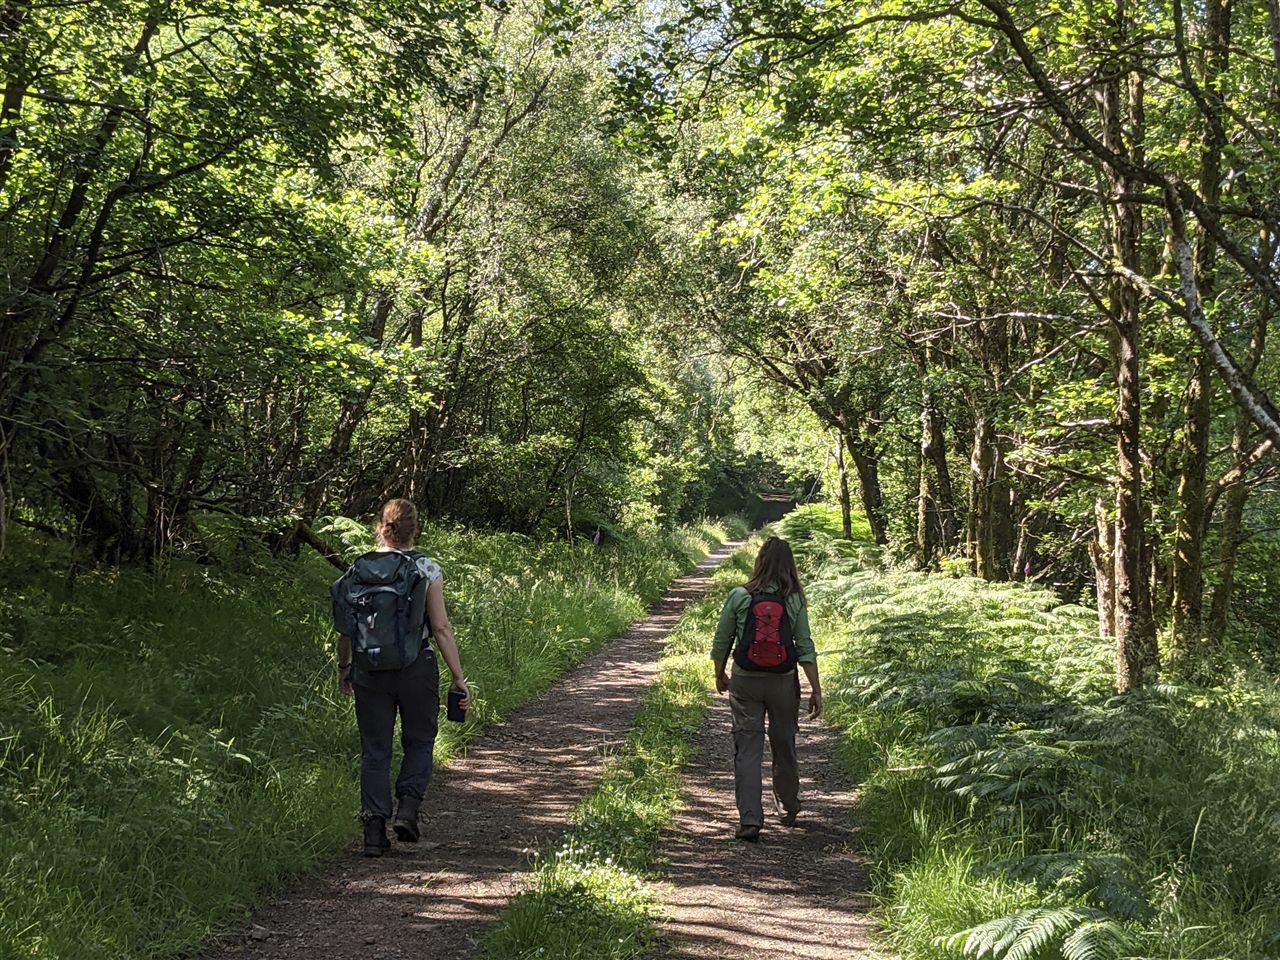 Two people walking along a forest trail, surrounded by trees on all sides.